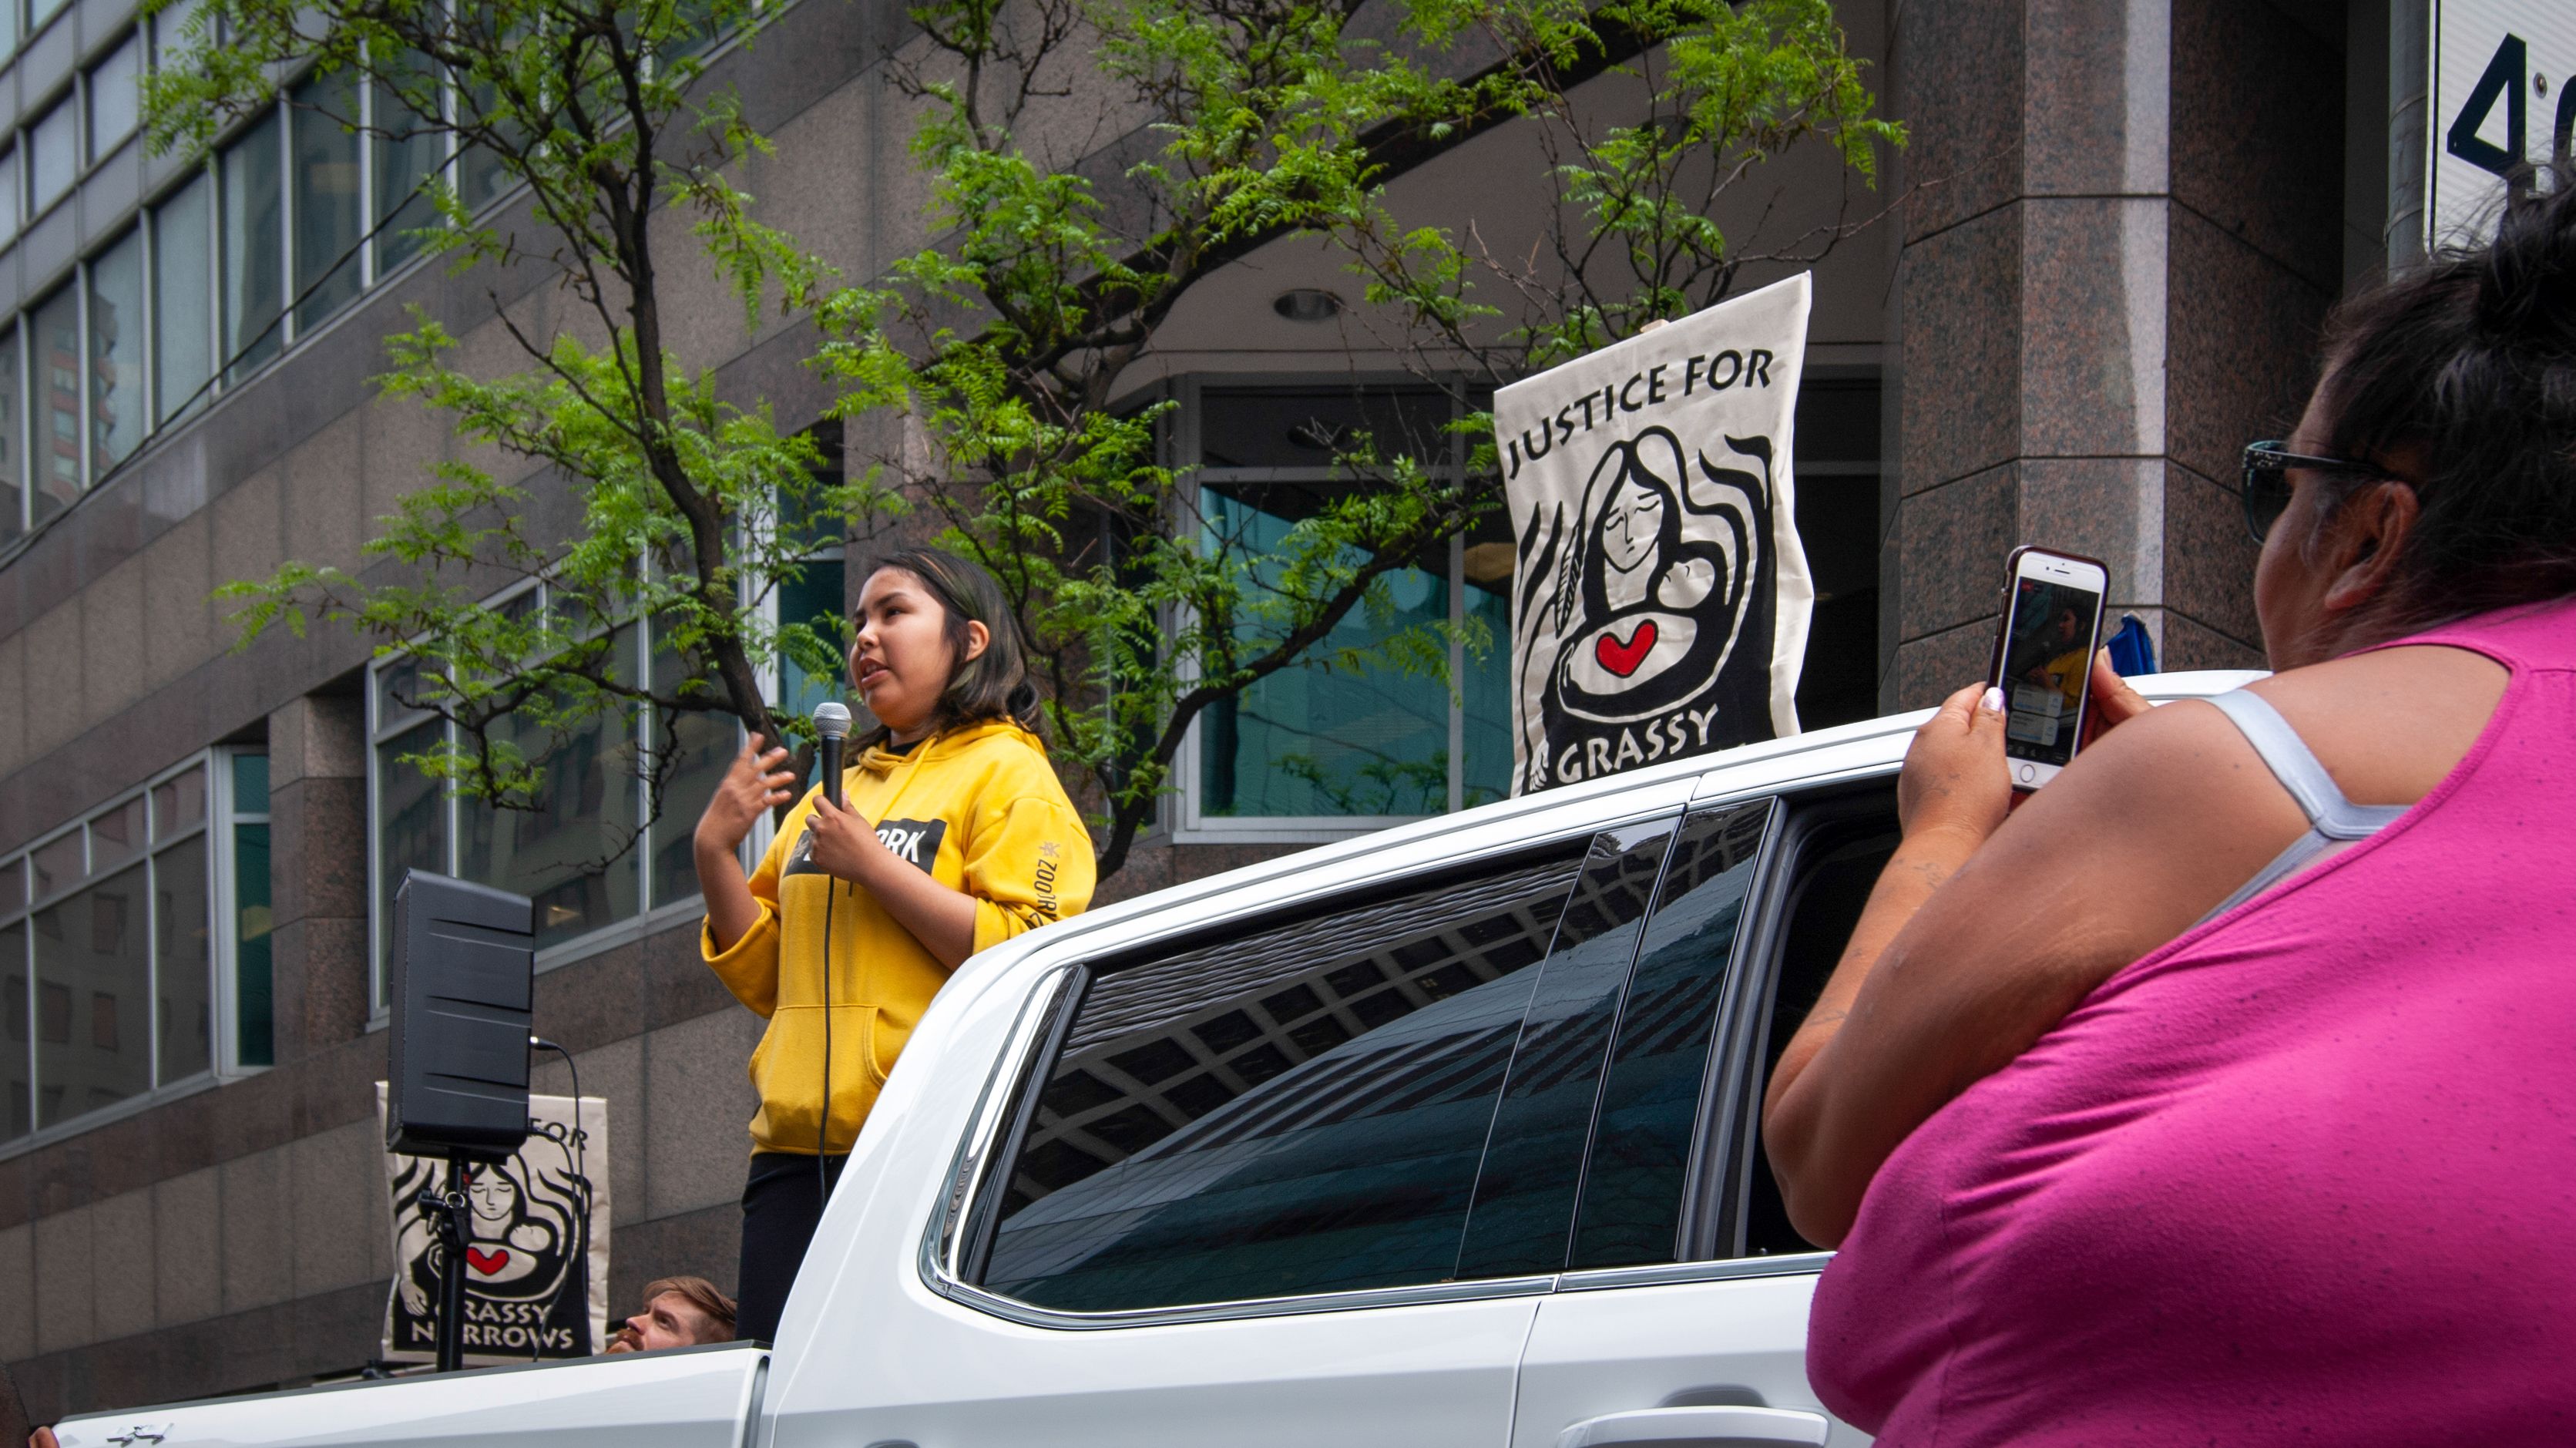 Jenae Turtle (left) stands before a crowd and speaks about her community while Chrissy Isaacs (right) stands below her, filming Jenae's speech. Canada, 2019. Image by Shelby Gilson.